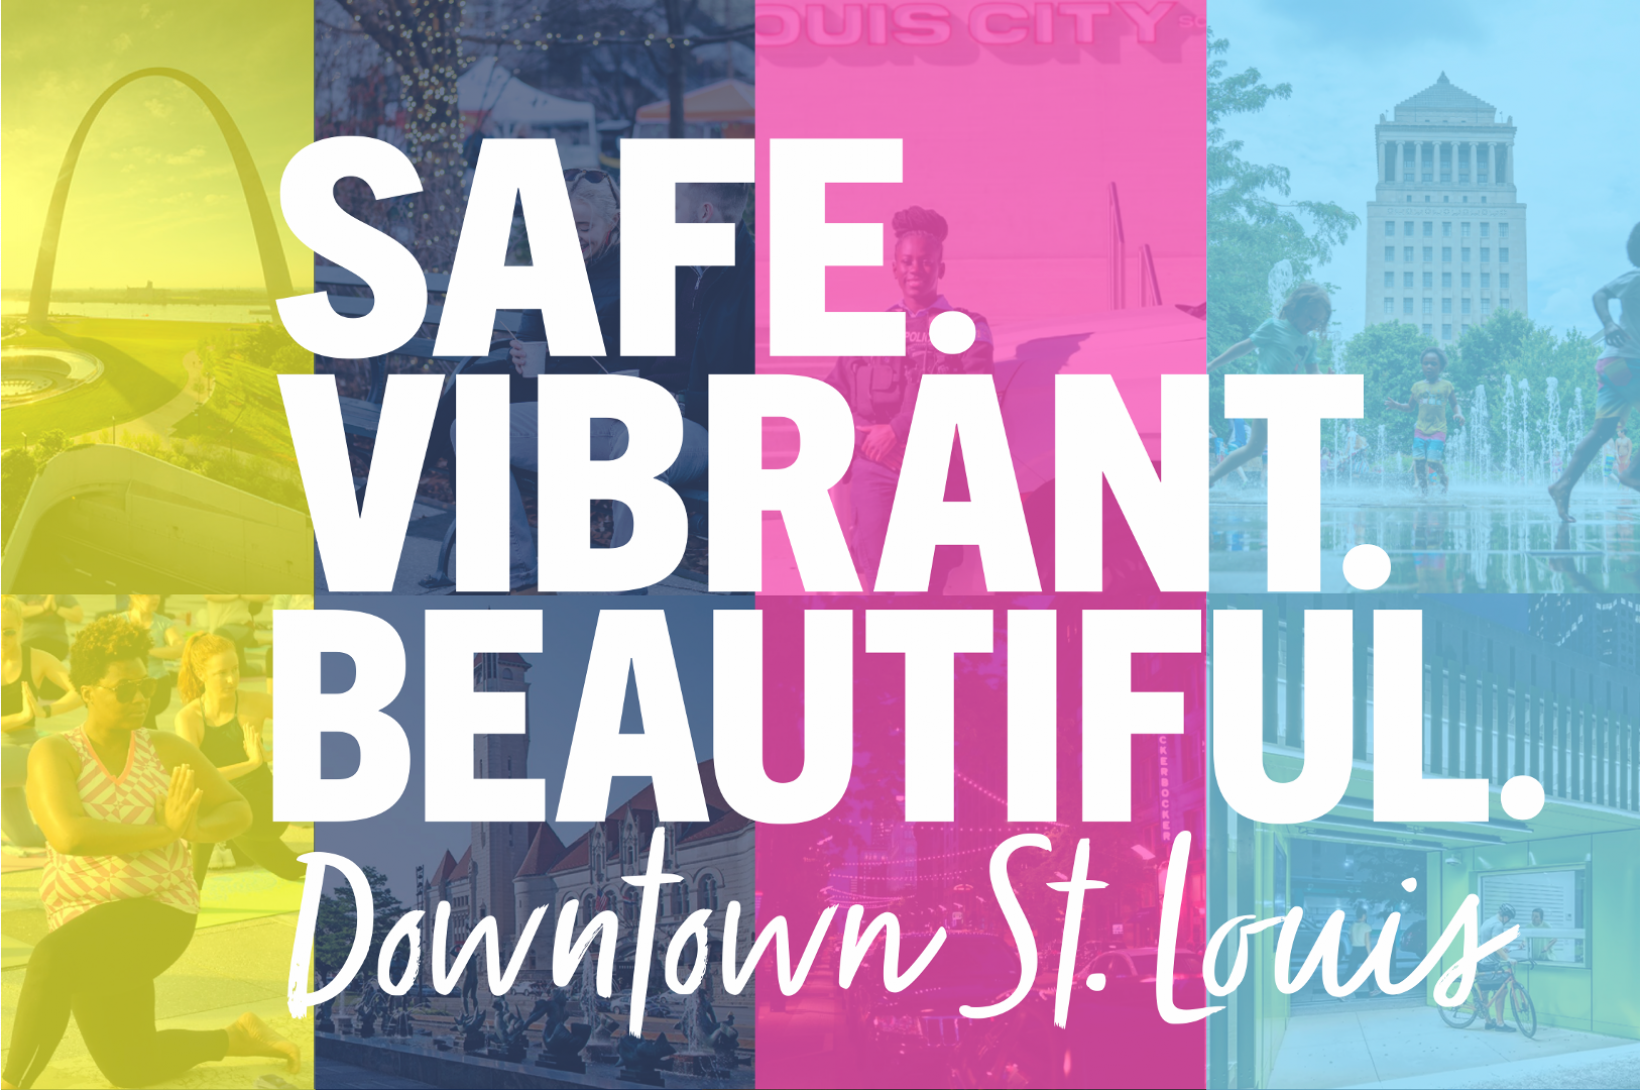 An image featuring photos of St. Louis and the words: "Safe. Vibrant. Beautiful. Downtown St. Louis"